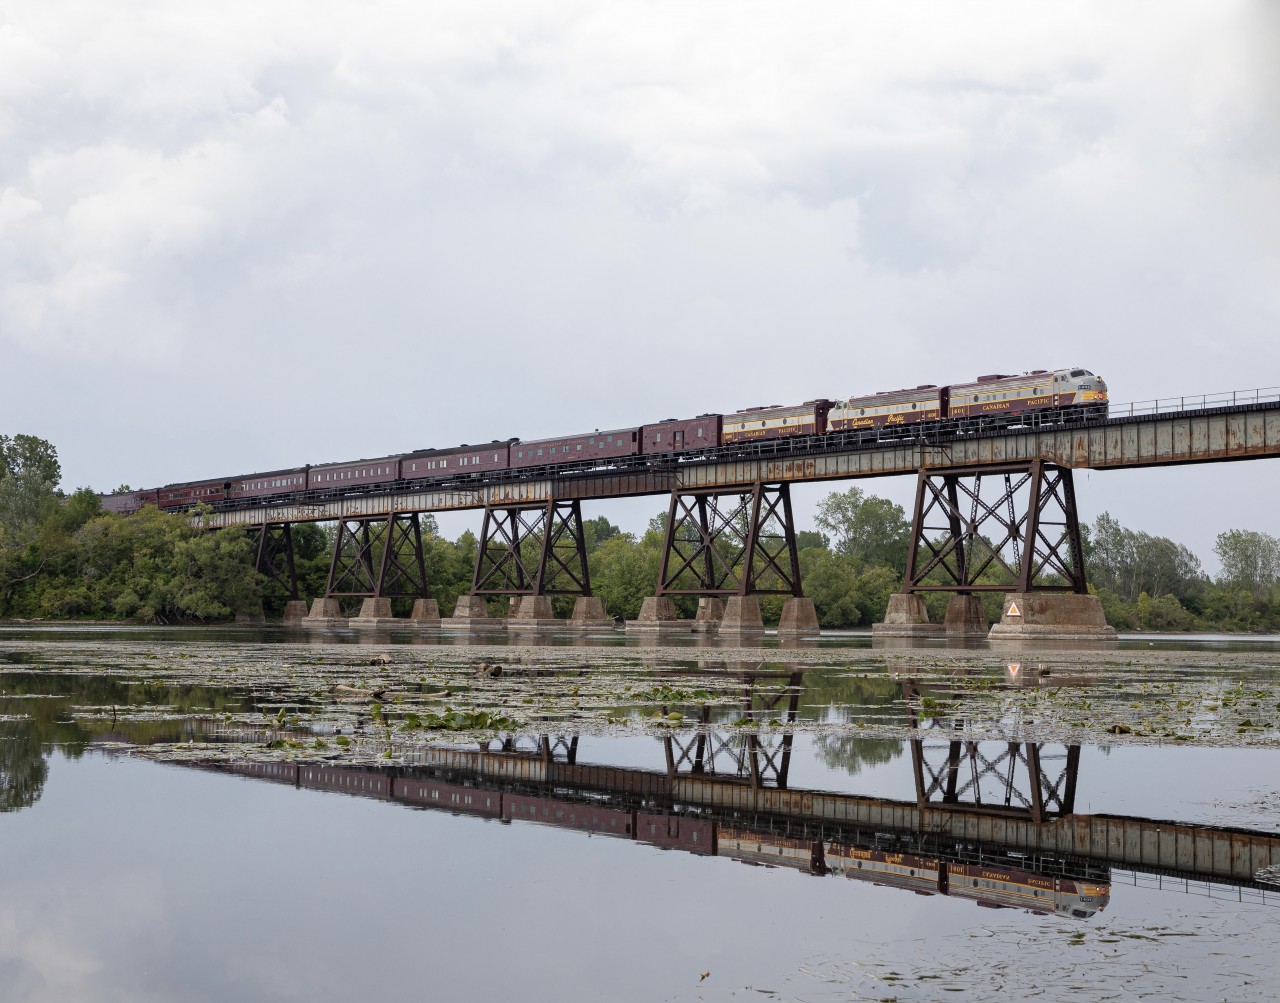 CP 41B crosses over the Trent River heading back out west, after spending a week and a half in Ottawa, for the CP Womens Golf League. Leading these beautiful Royal Cars are a pair of beautiful F units, and a B unit creating power for the F units to haul their train back west.